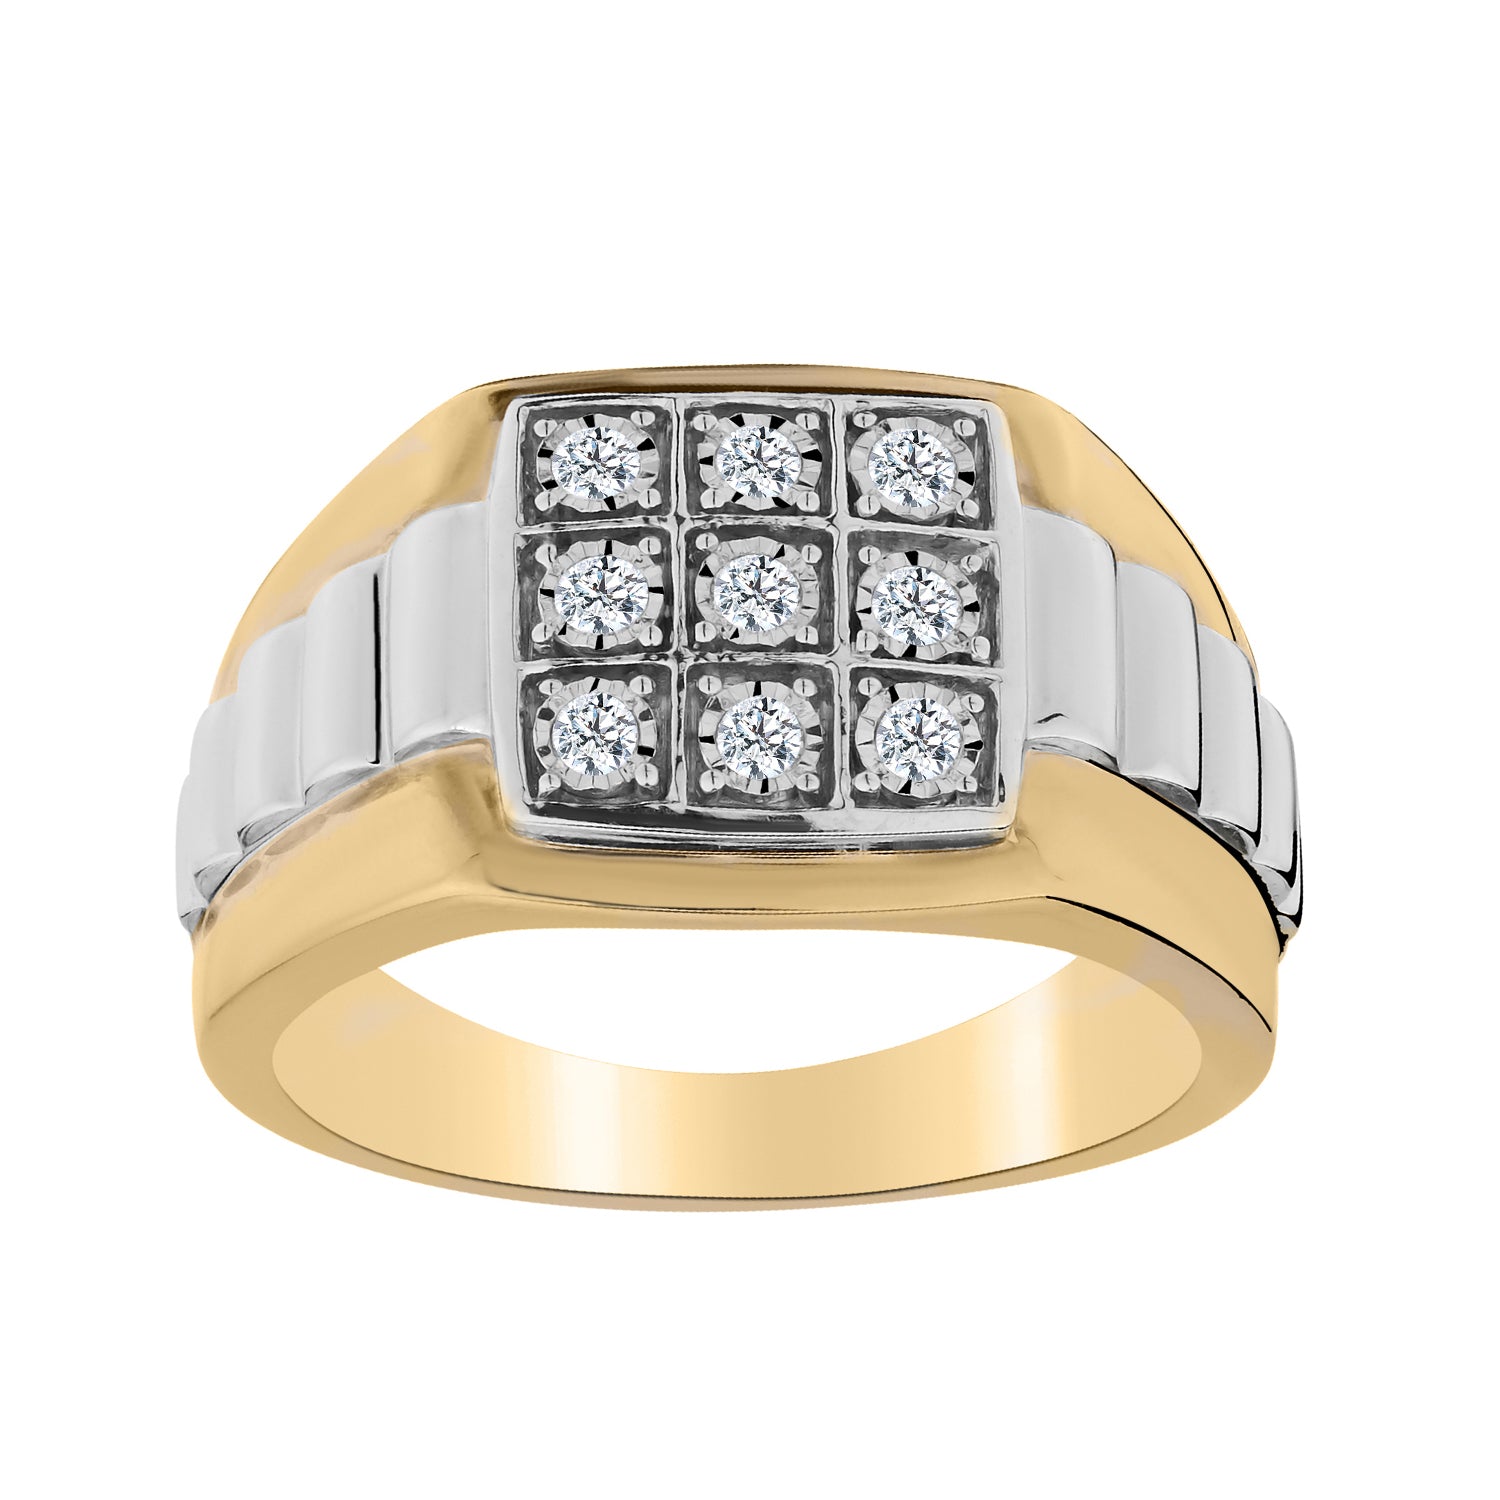 .25 Carat Diamond Gentleman's Ring, 10kt White And Yellow Gold (Two Tone).....................Now - Griffin Jewellery Designs